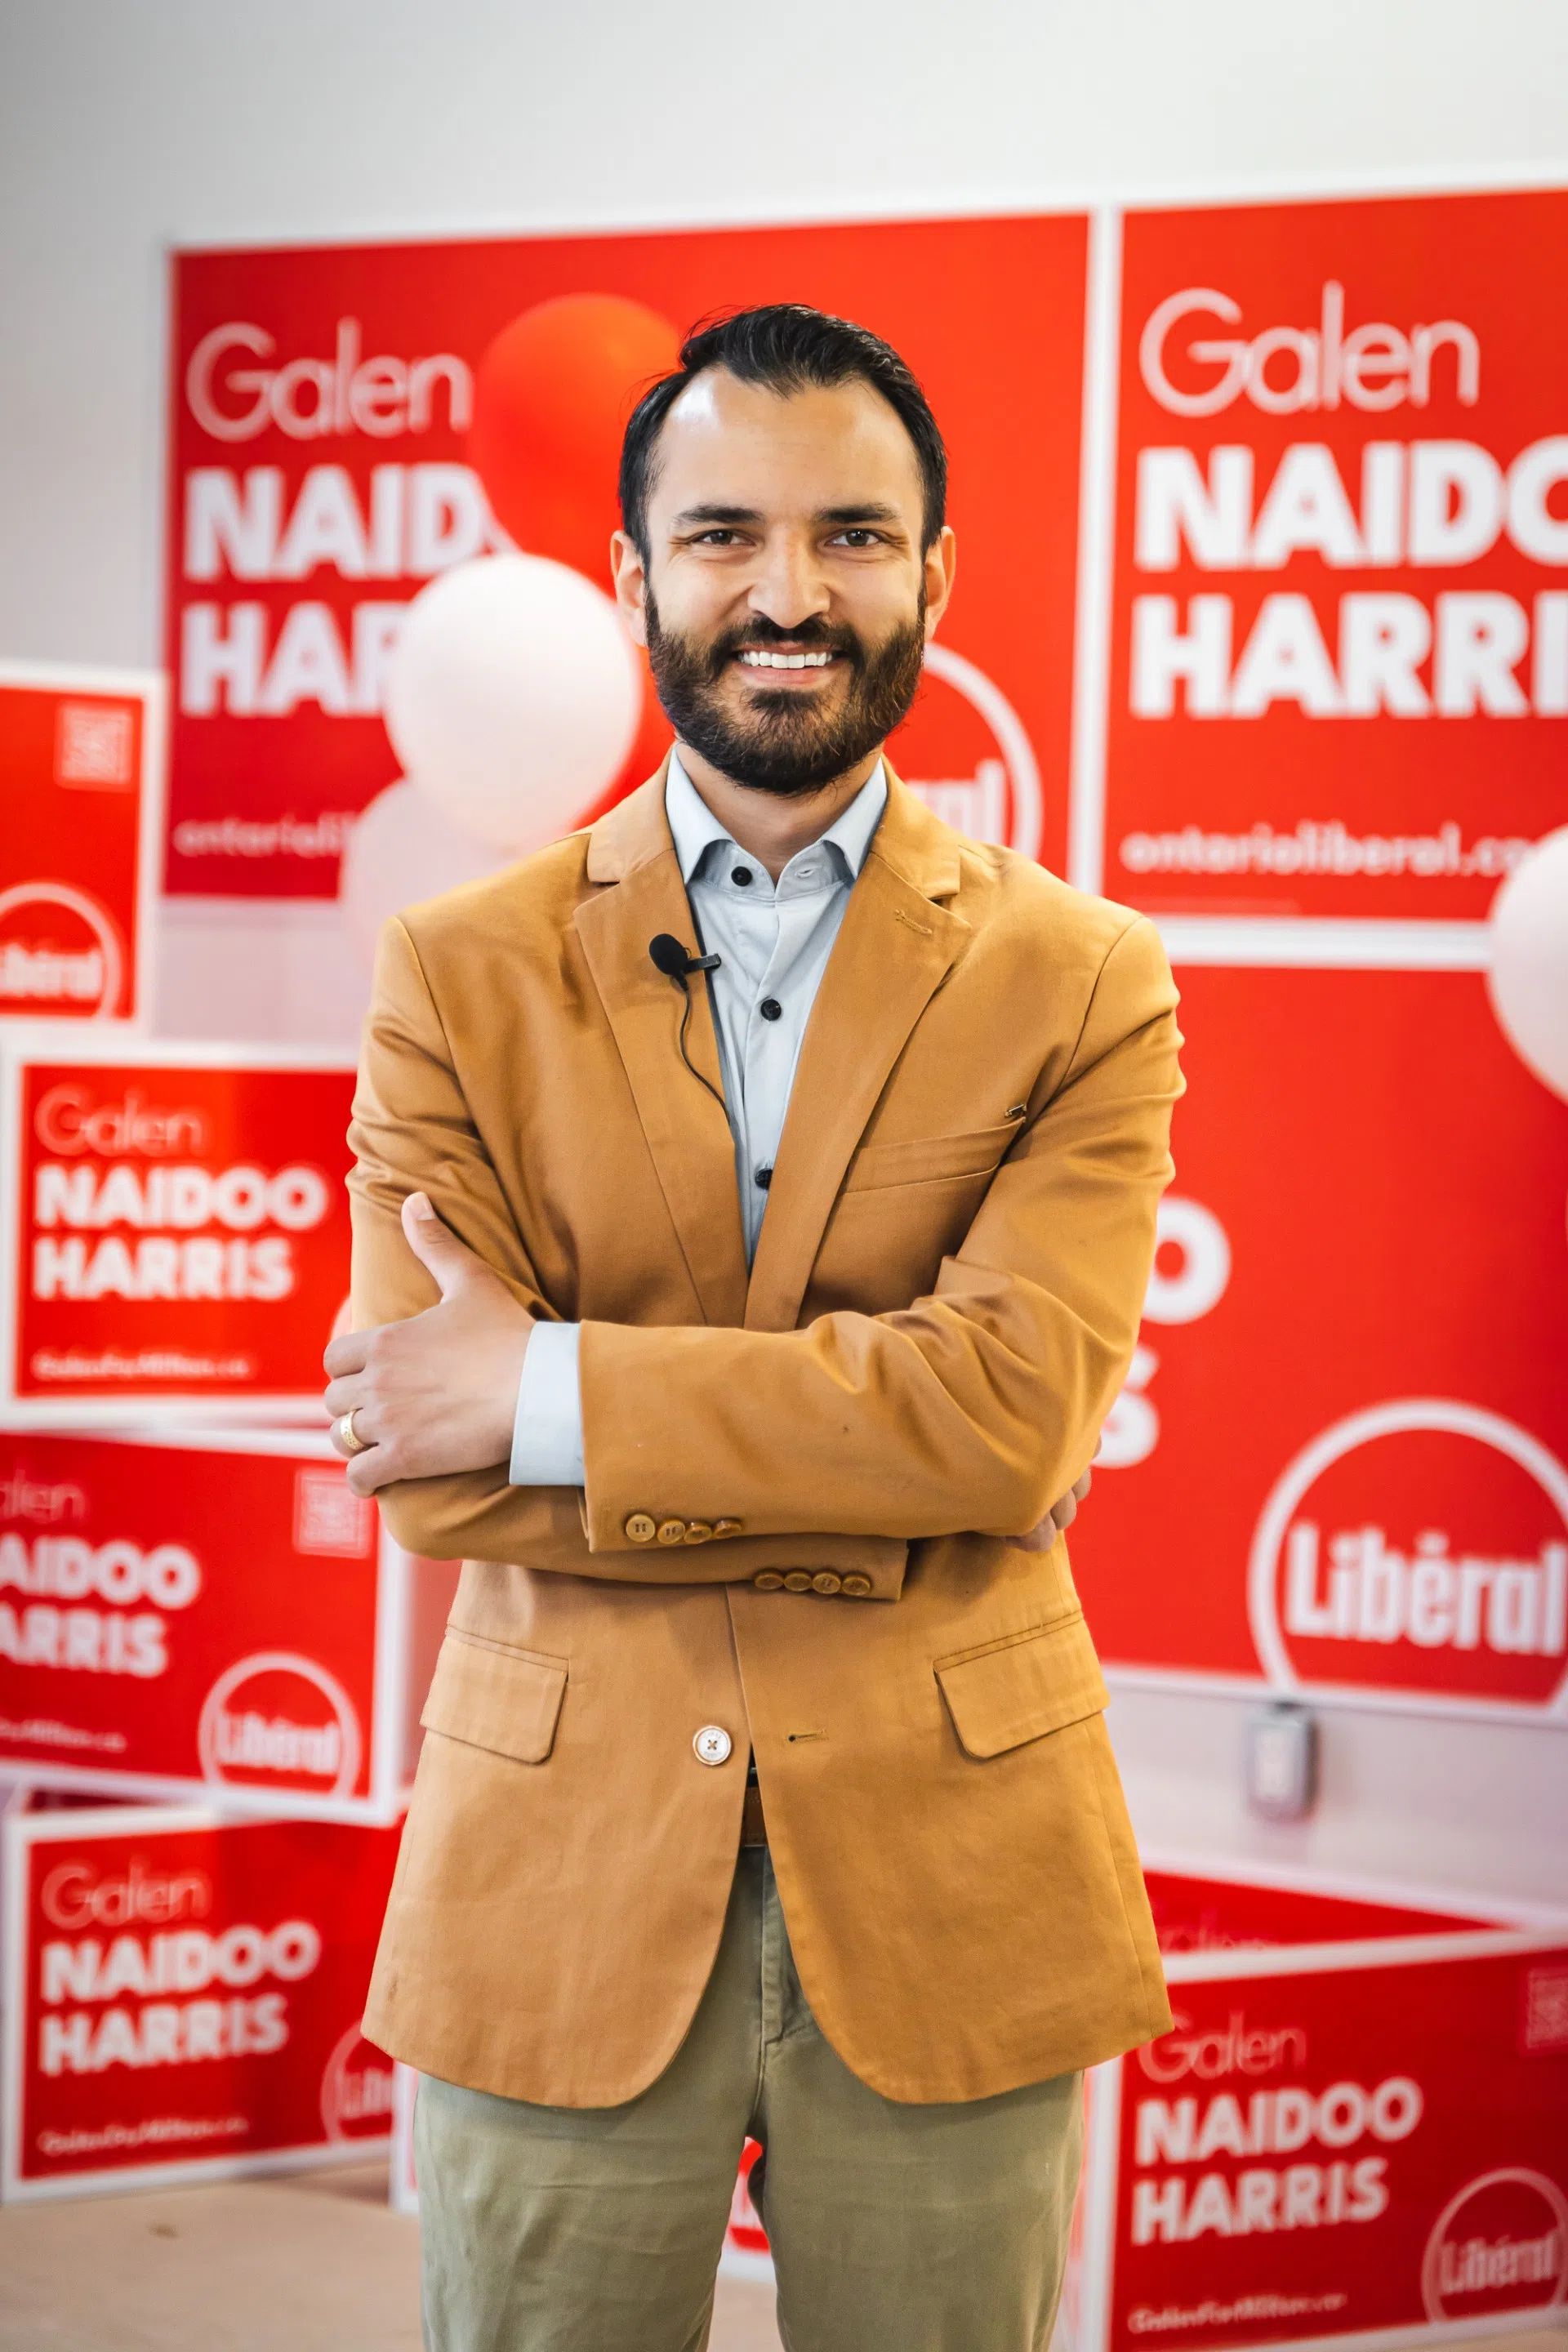 Get to know Galen Naidoo Harris, Ontario Liberal Party candidate for Milton's by-election